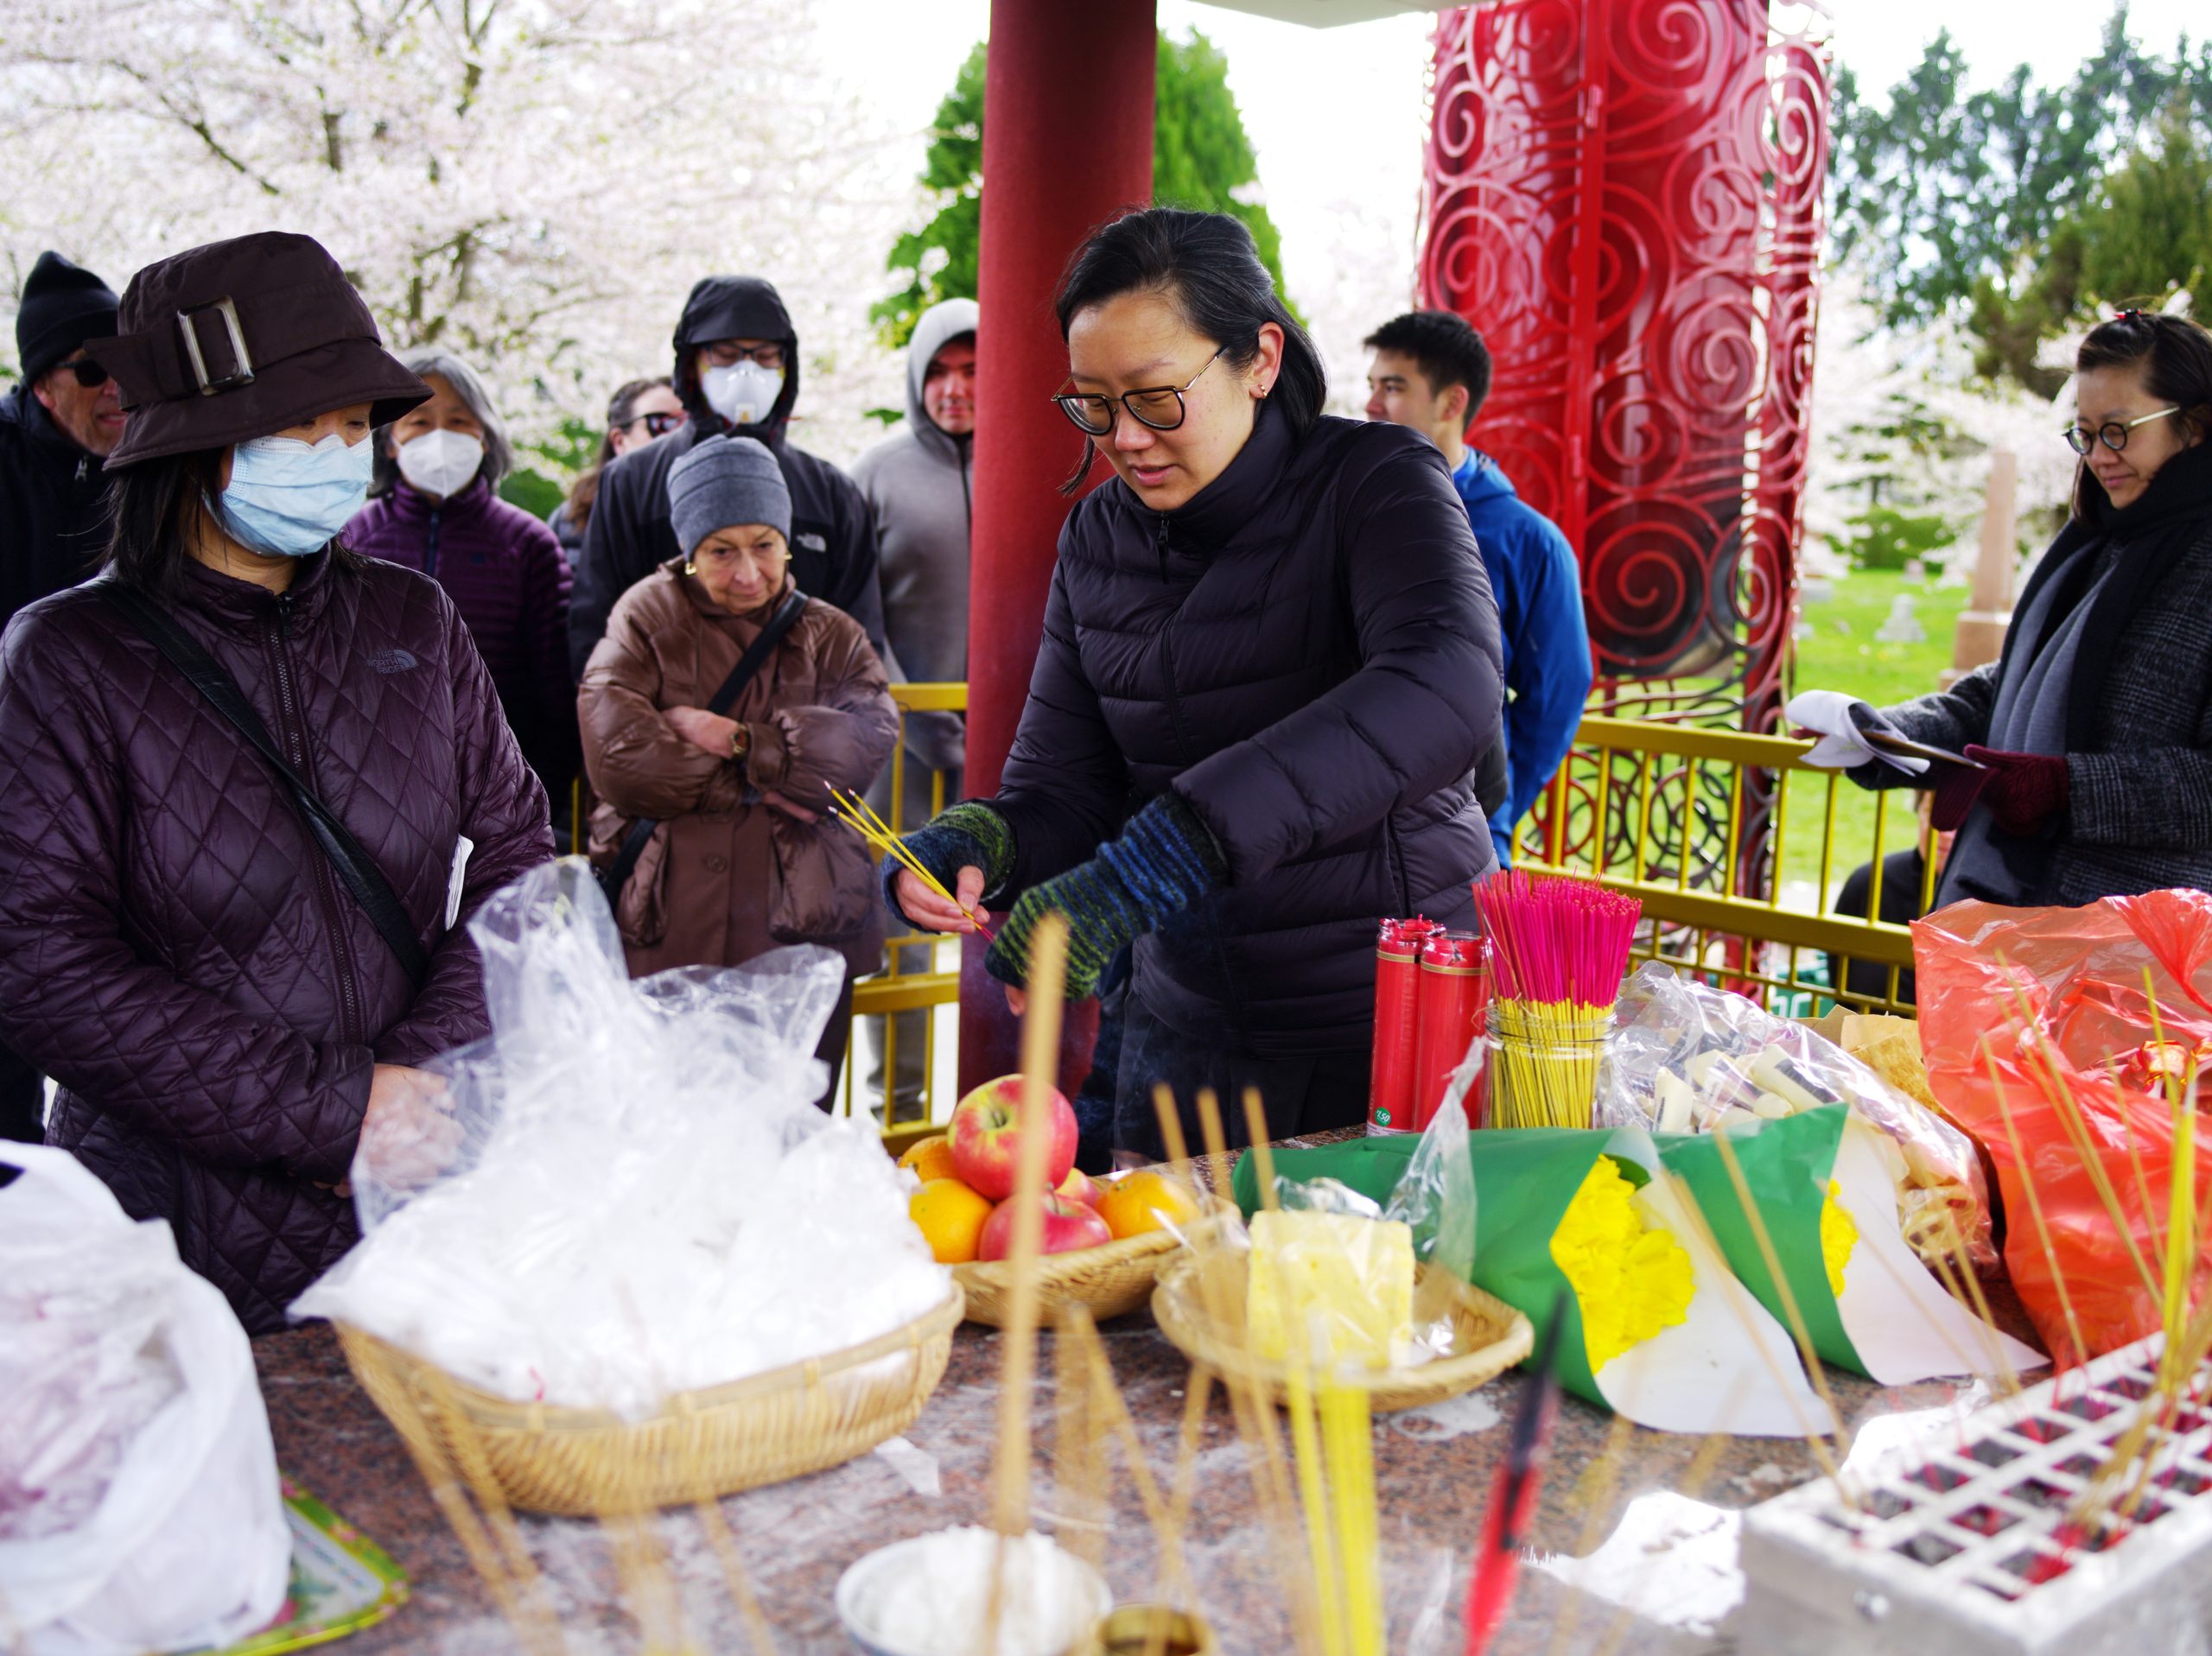 Image Description: Two people stand at the Chinese Pavilion Altar. They are both wearing puffy coats. One person prepares a small bundle of lit incense sticks with a piece of ribbon. The other person watches the lit incense sticks begin to smoke. In the front of the photograph the Altar is bursting with desserts, flowers, incense, bowls of rice and wicker baskets filled with plastic bags. A group of people watch the activity at the Altar from the back of the photograph.